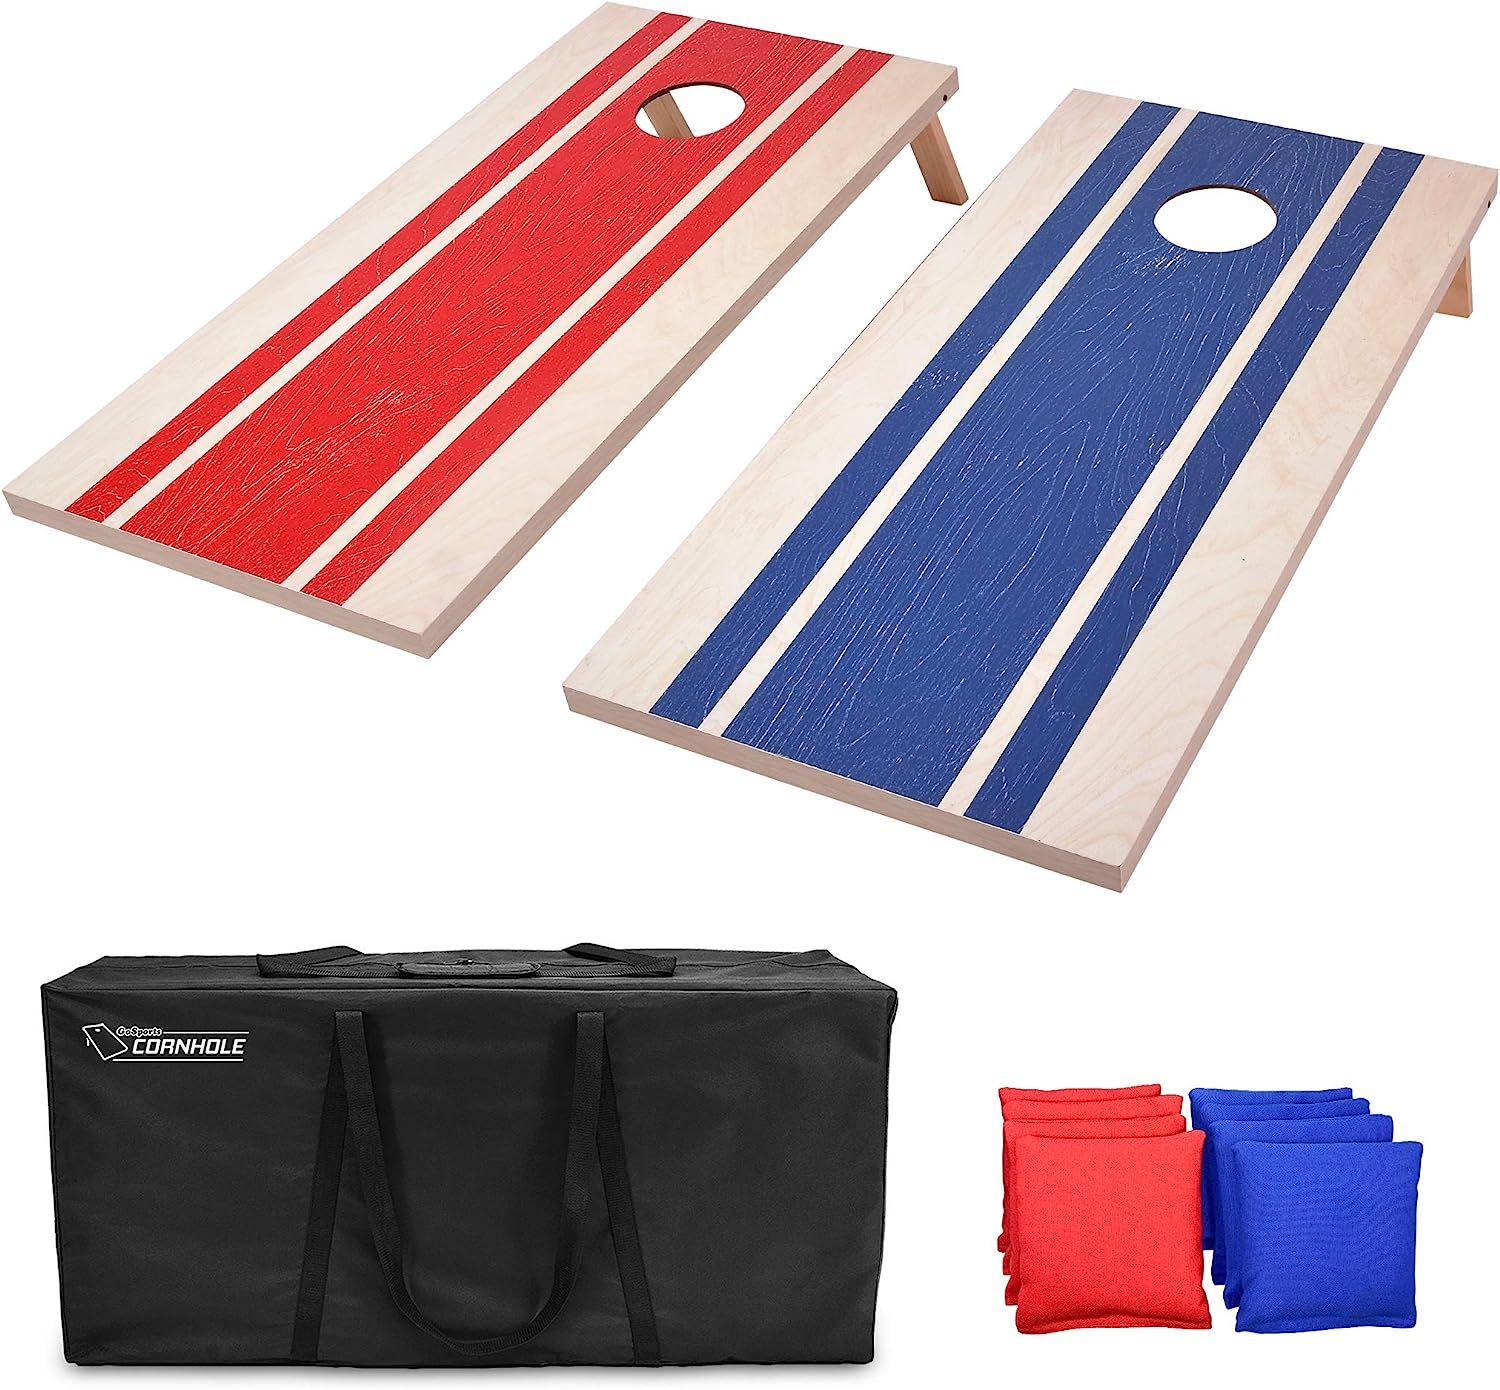 GoSports Classic Cornhole Set - Includes 8 Bean Bags, Travel Case and Game Rules (Choose between ... | Amazon (US)